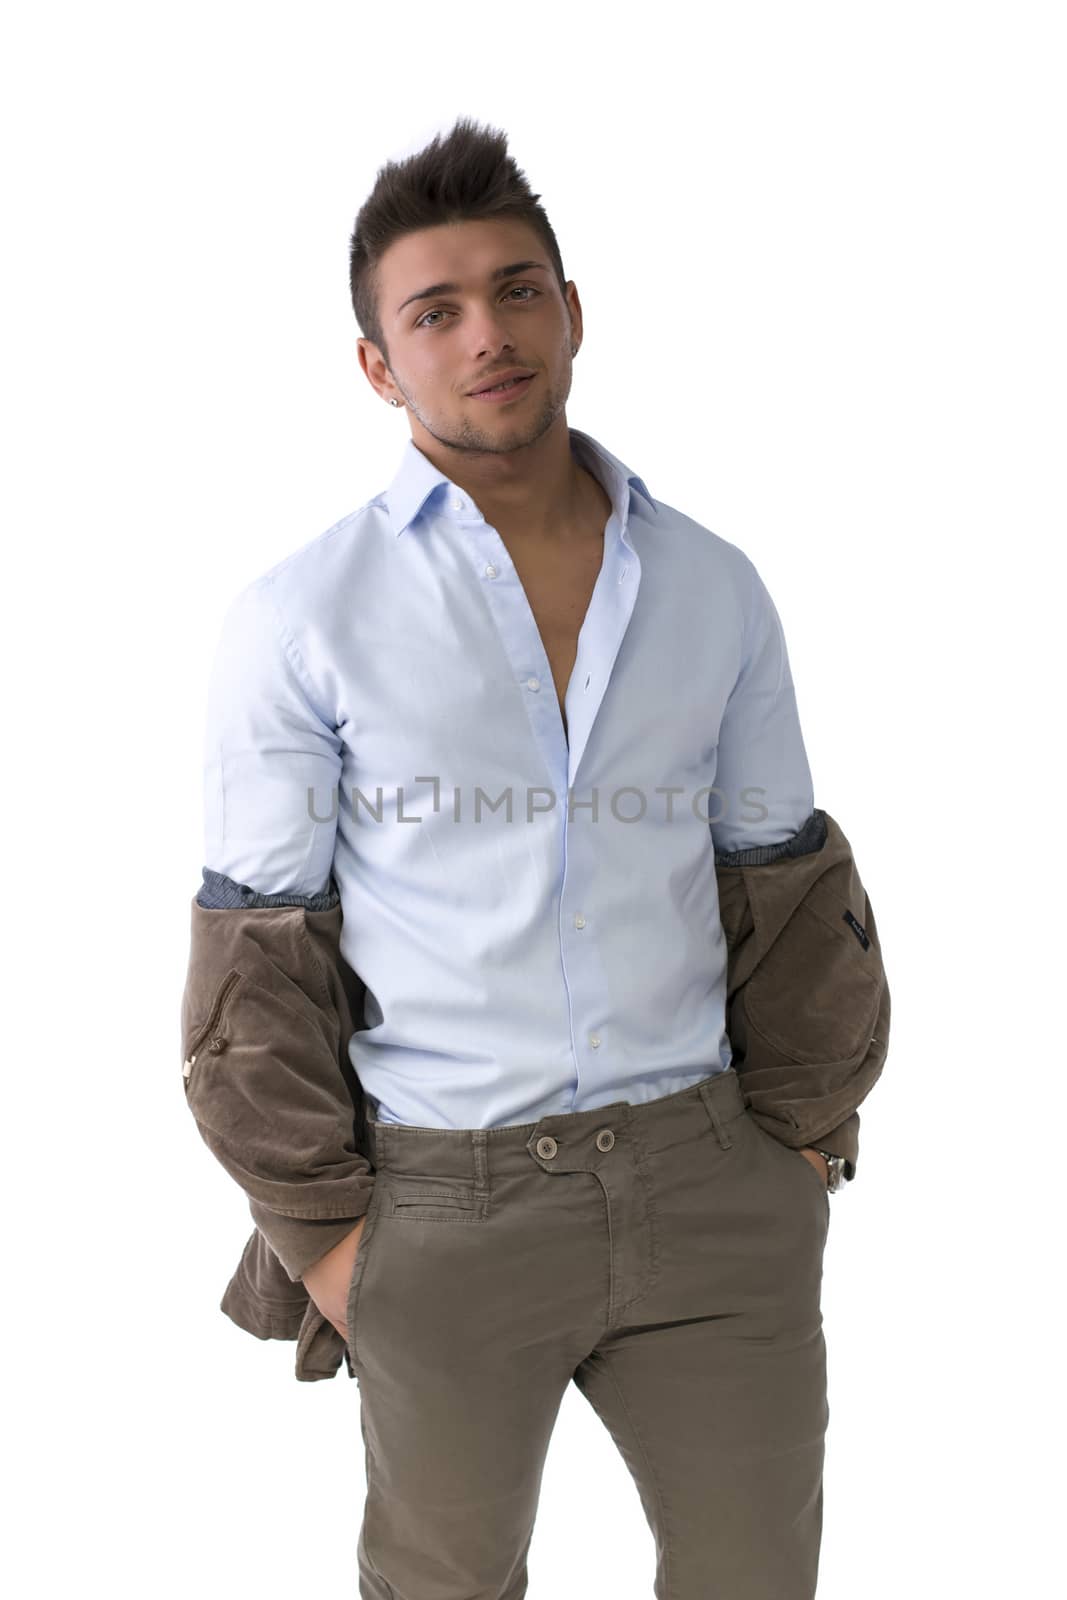 Handsome young man standing with jacket pulled down by artofphoto